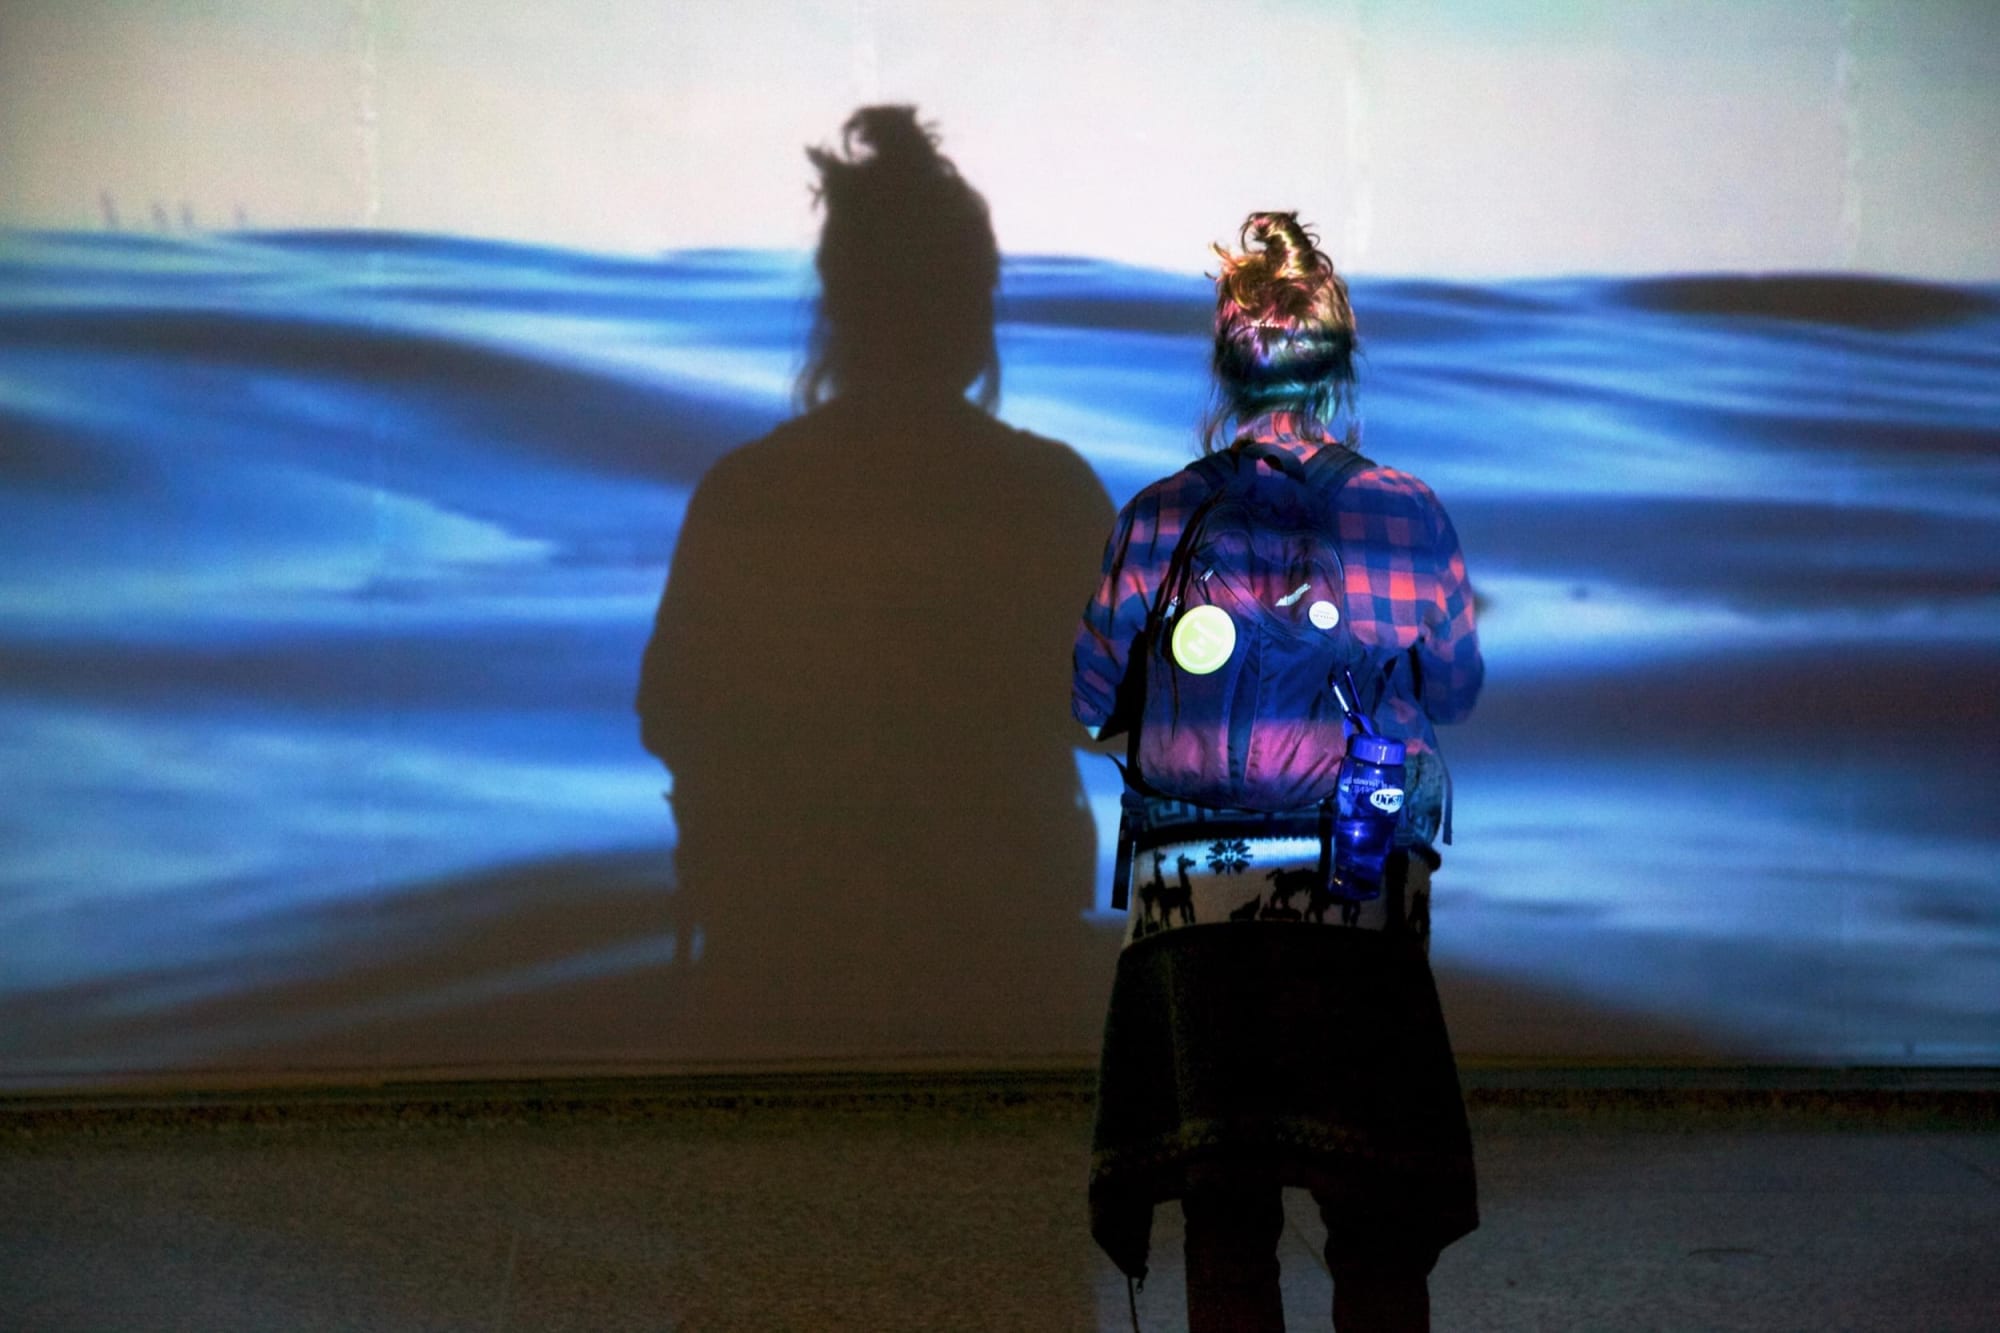 Photograph of the back of a seemingly teenage girl wearing a backpack staring at the life-size projection of water in front of her. We see her shadow in the projection of the water.